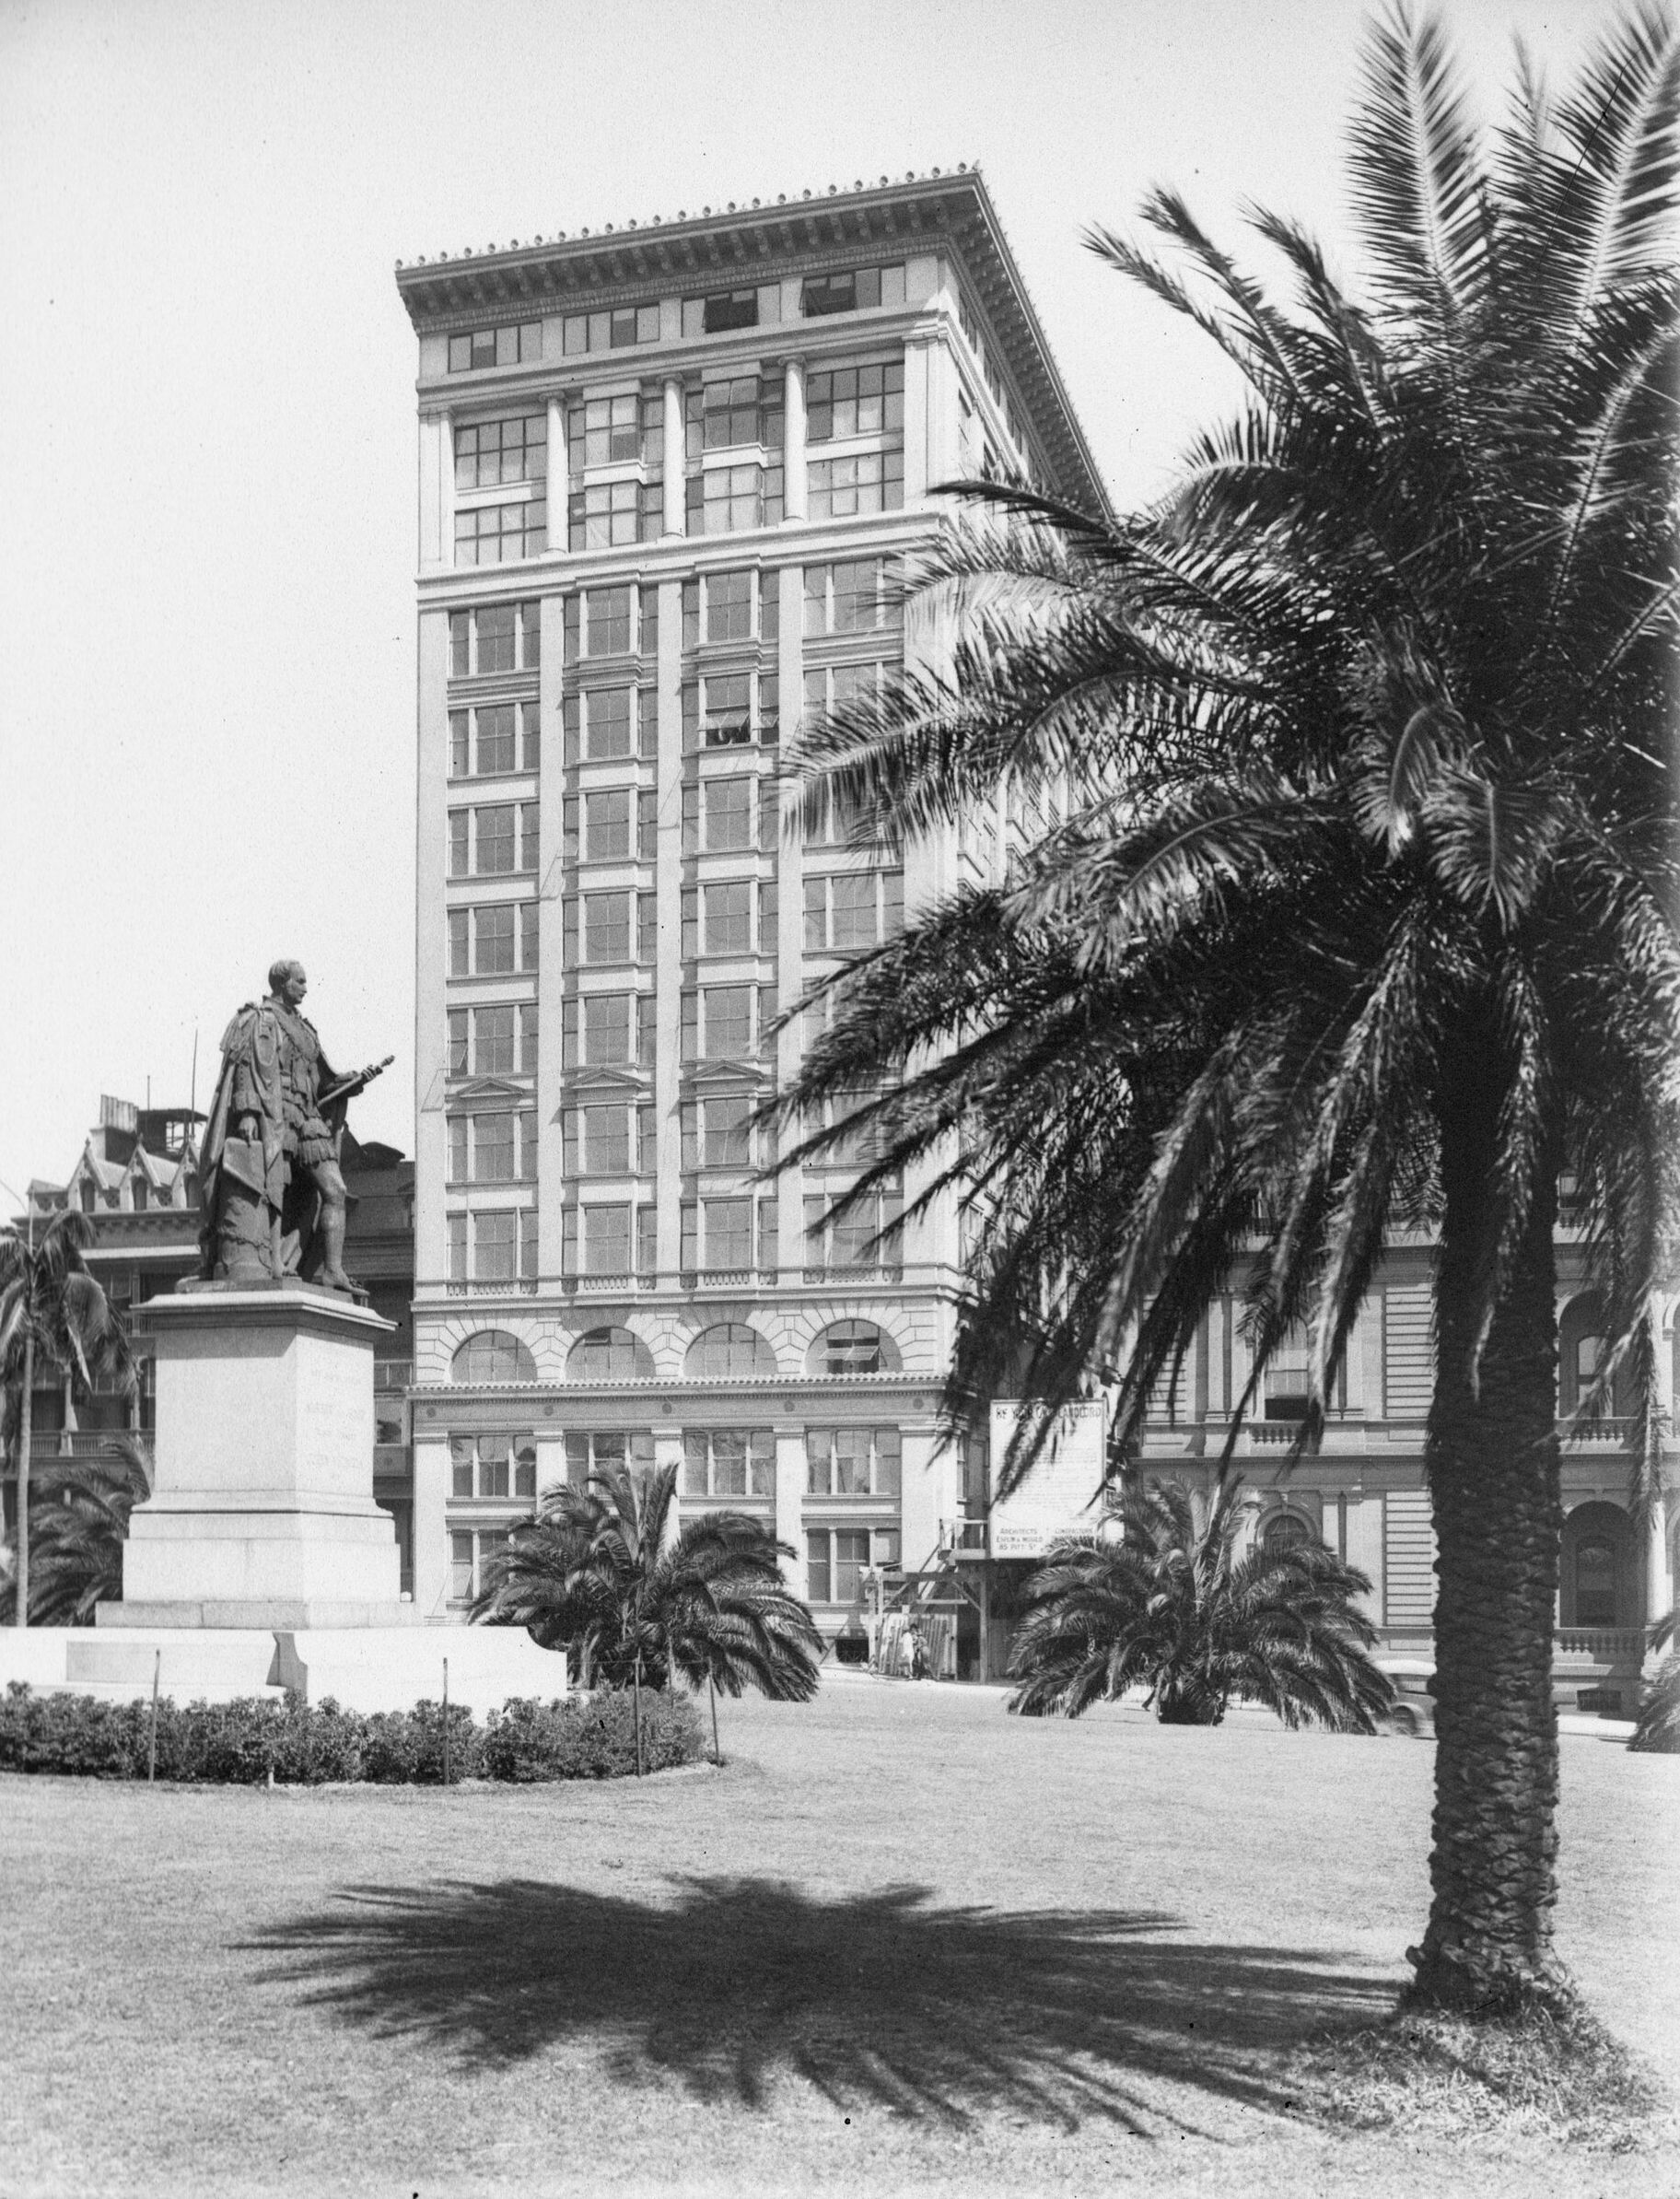 The Prince Consort’s statue with the Astor building in the background. Government Printing Office